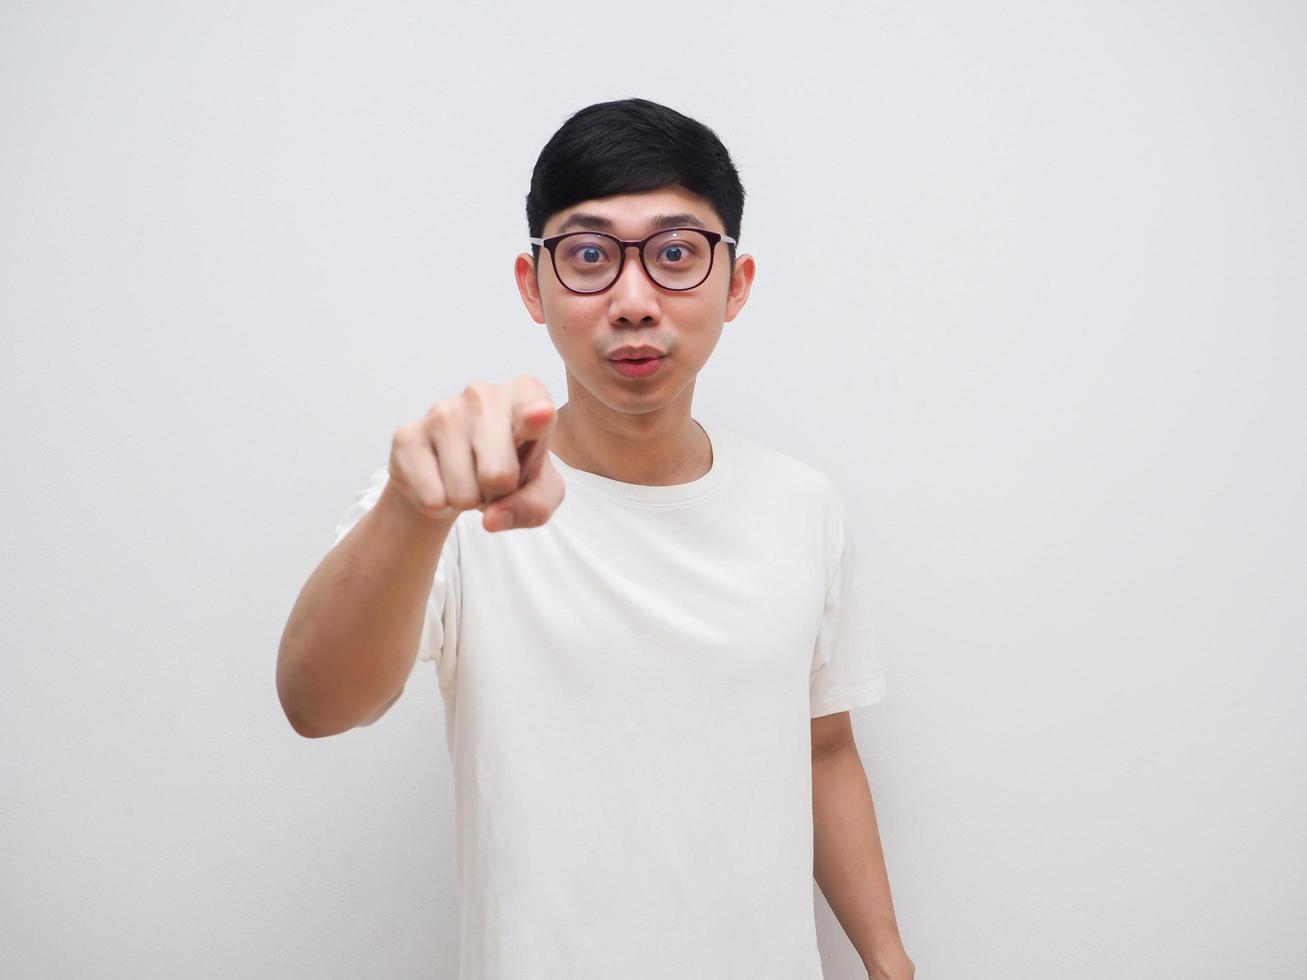 Asian man glasses point finger at you white shirt,I want you concept photo